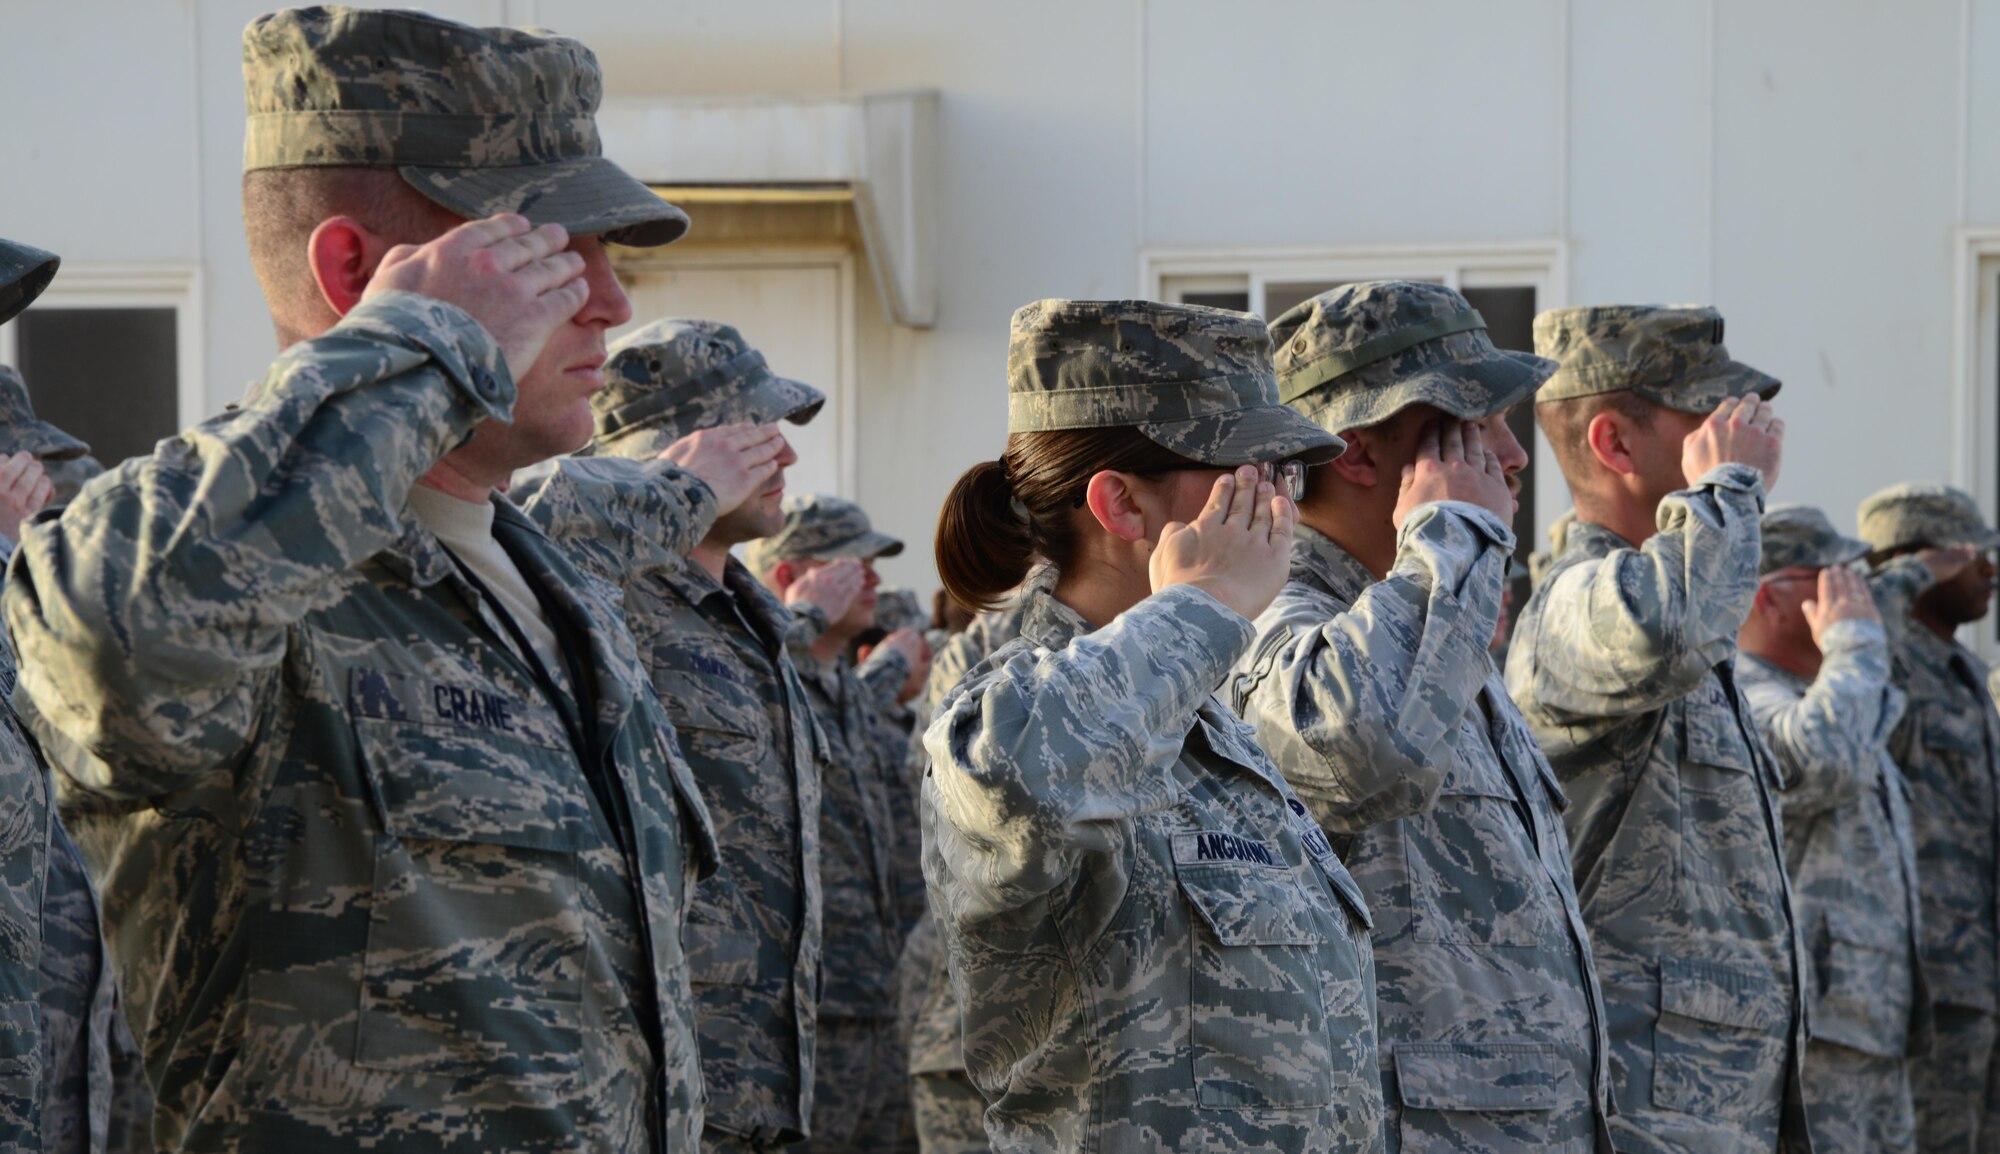 U.S. Air Force Airmen from the 379th Expeditionary Maintenance Group salute the U.S. flag while in formation during a Washington’s Birthday retreat ceremony, Feb. 16, 2015, at Al Udeid Air Base, Qatar. Washington’s Birthday, also known as President’s Day, was originally celebrated on February 22 but moved to the third Monday of February by the federal government in an attempt to create more three-day weekends.  Today, the holiday is traditionally viewed as a time of patriotic celebration and remembrance that honors presidents of United States.  (U.S. Air Force photo by Senior Airman Kia Atkins)